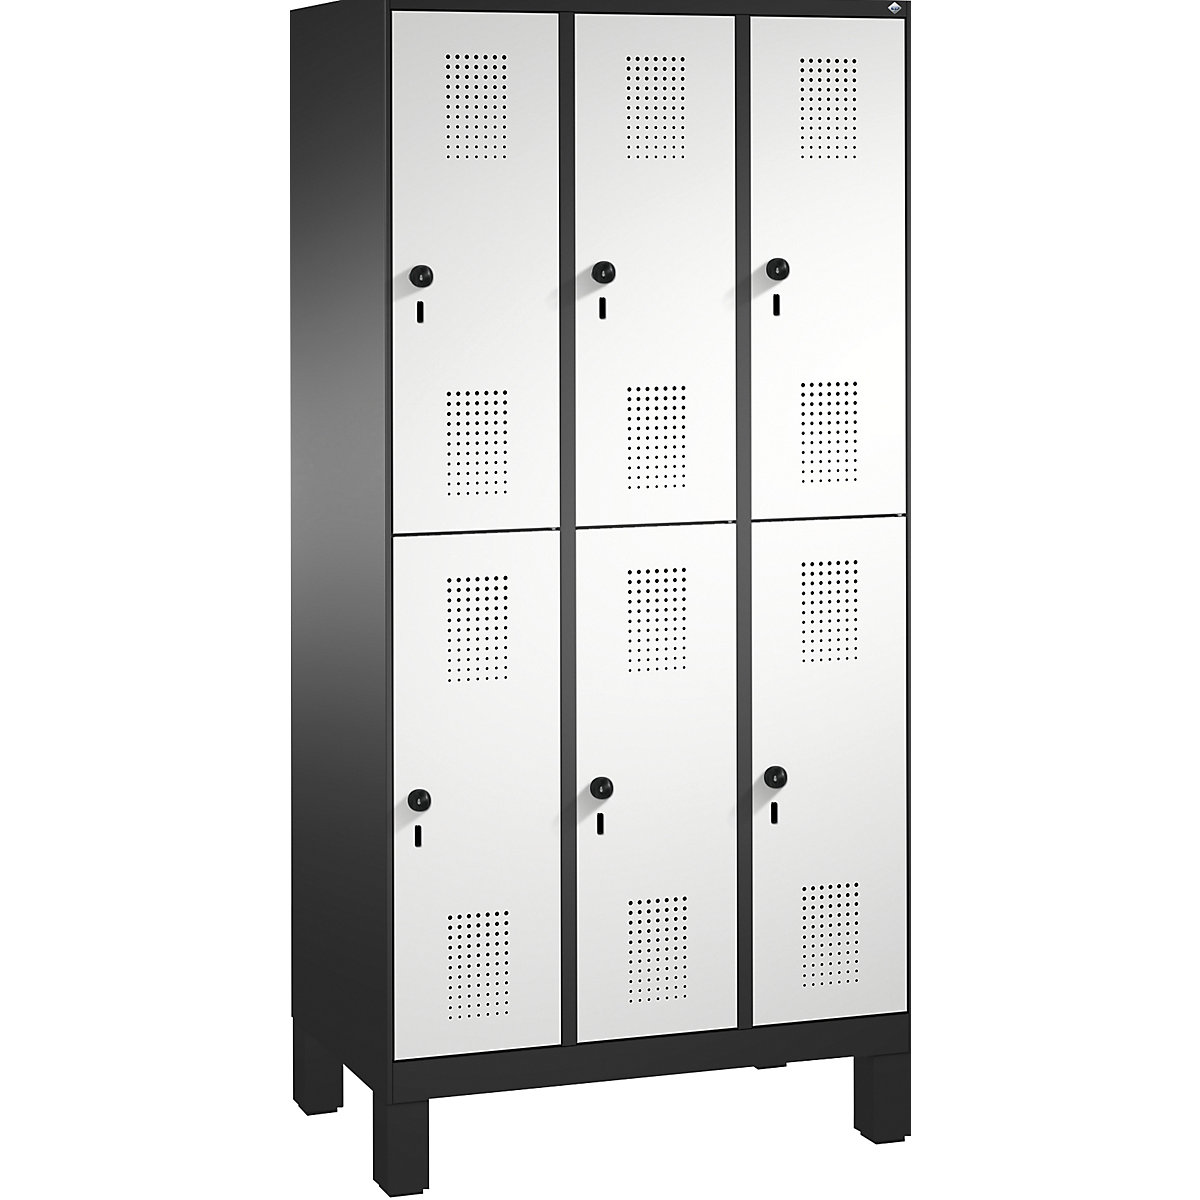 EVOLO cloakroom locker, double tier, with feet – C+P, 3 compartments, 2 shelf compartments each, compartment width 300 mm, black grey / light grey-10